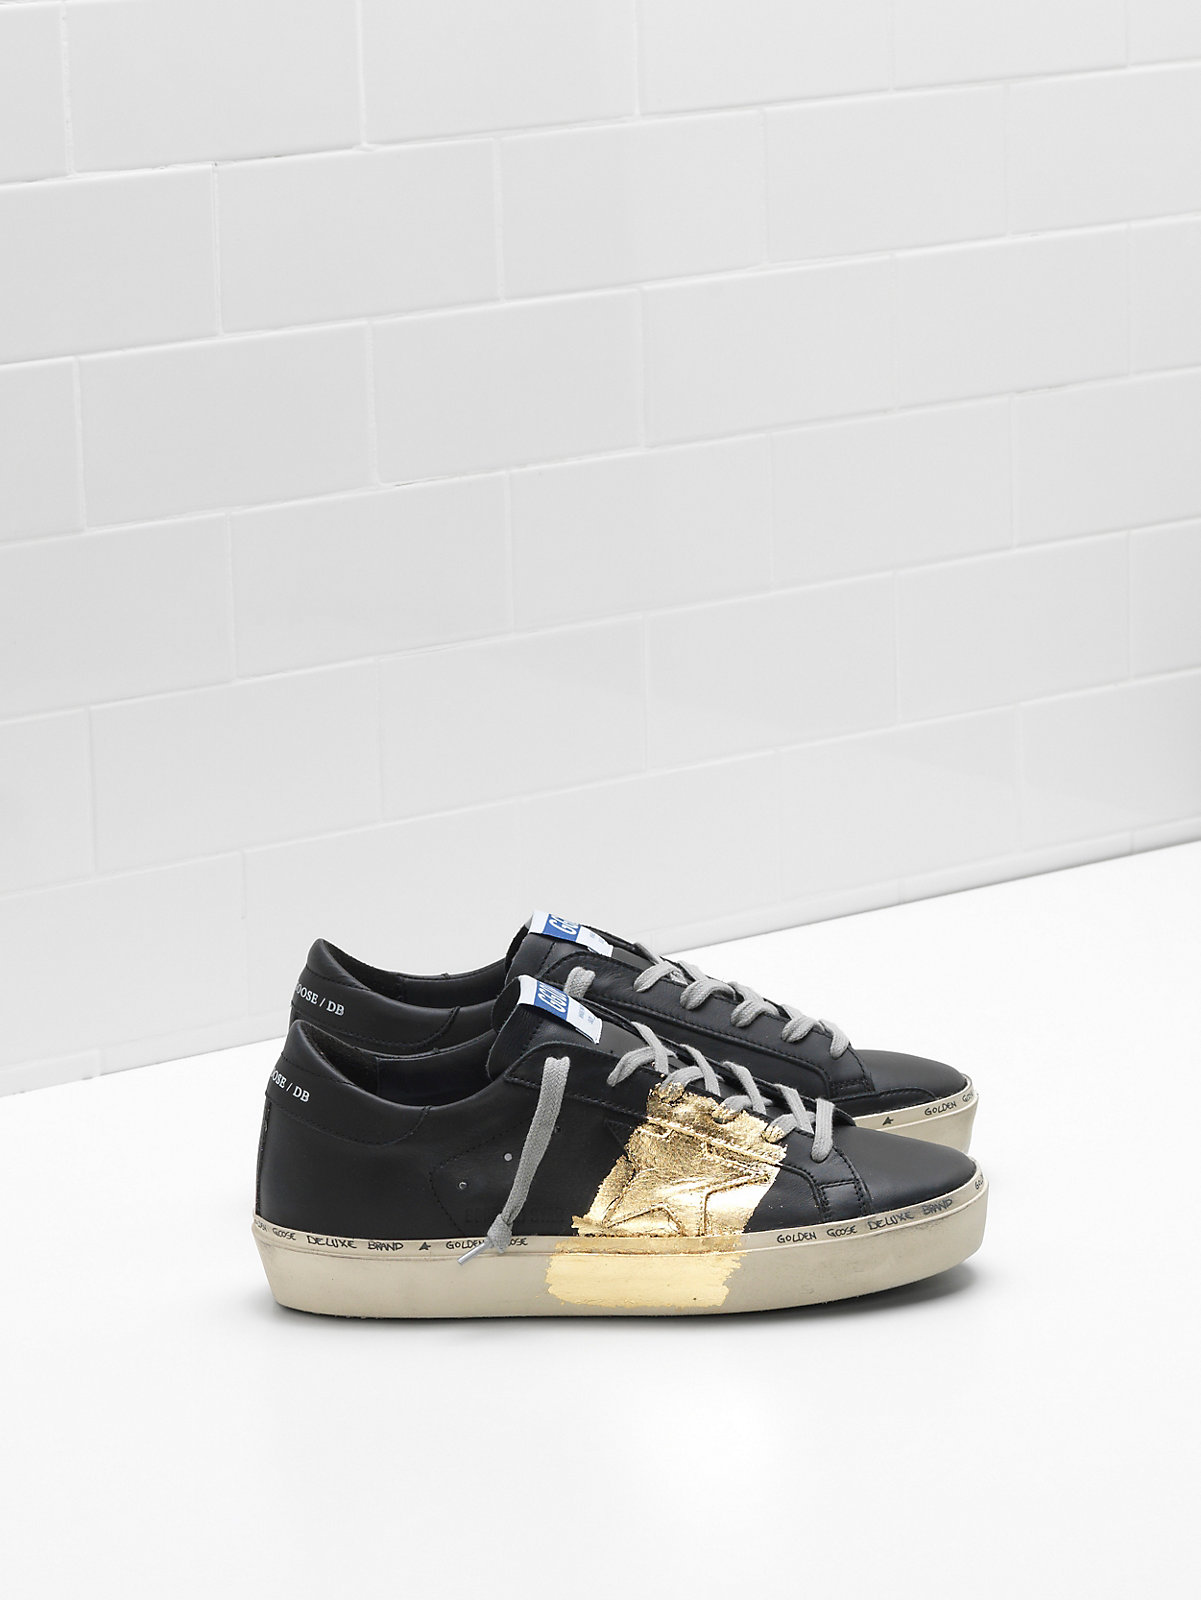 Golden Goose HI STAR Sneakers G33WS945.A2 Upper in calf leather 24-carat gold leaf Branding handwritten on the sole